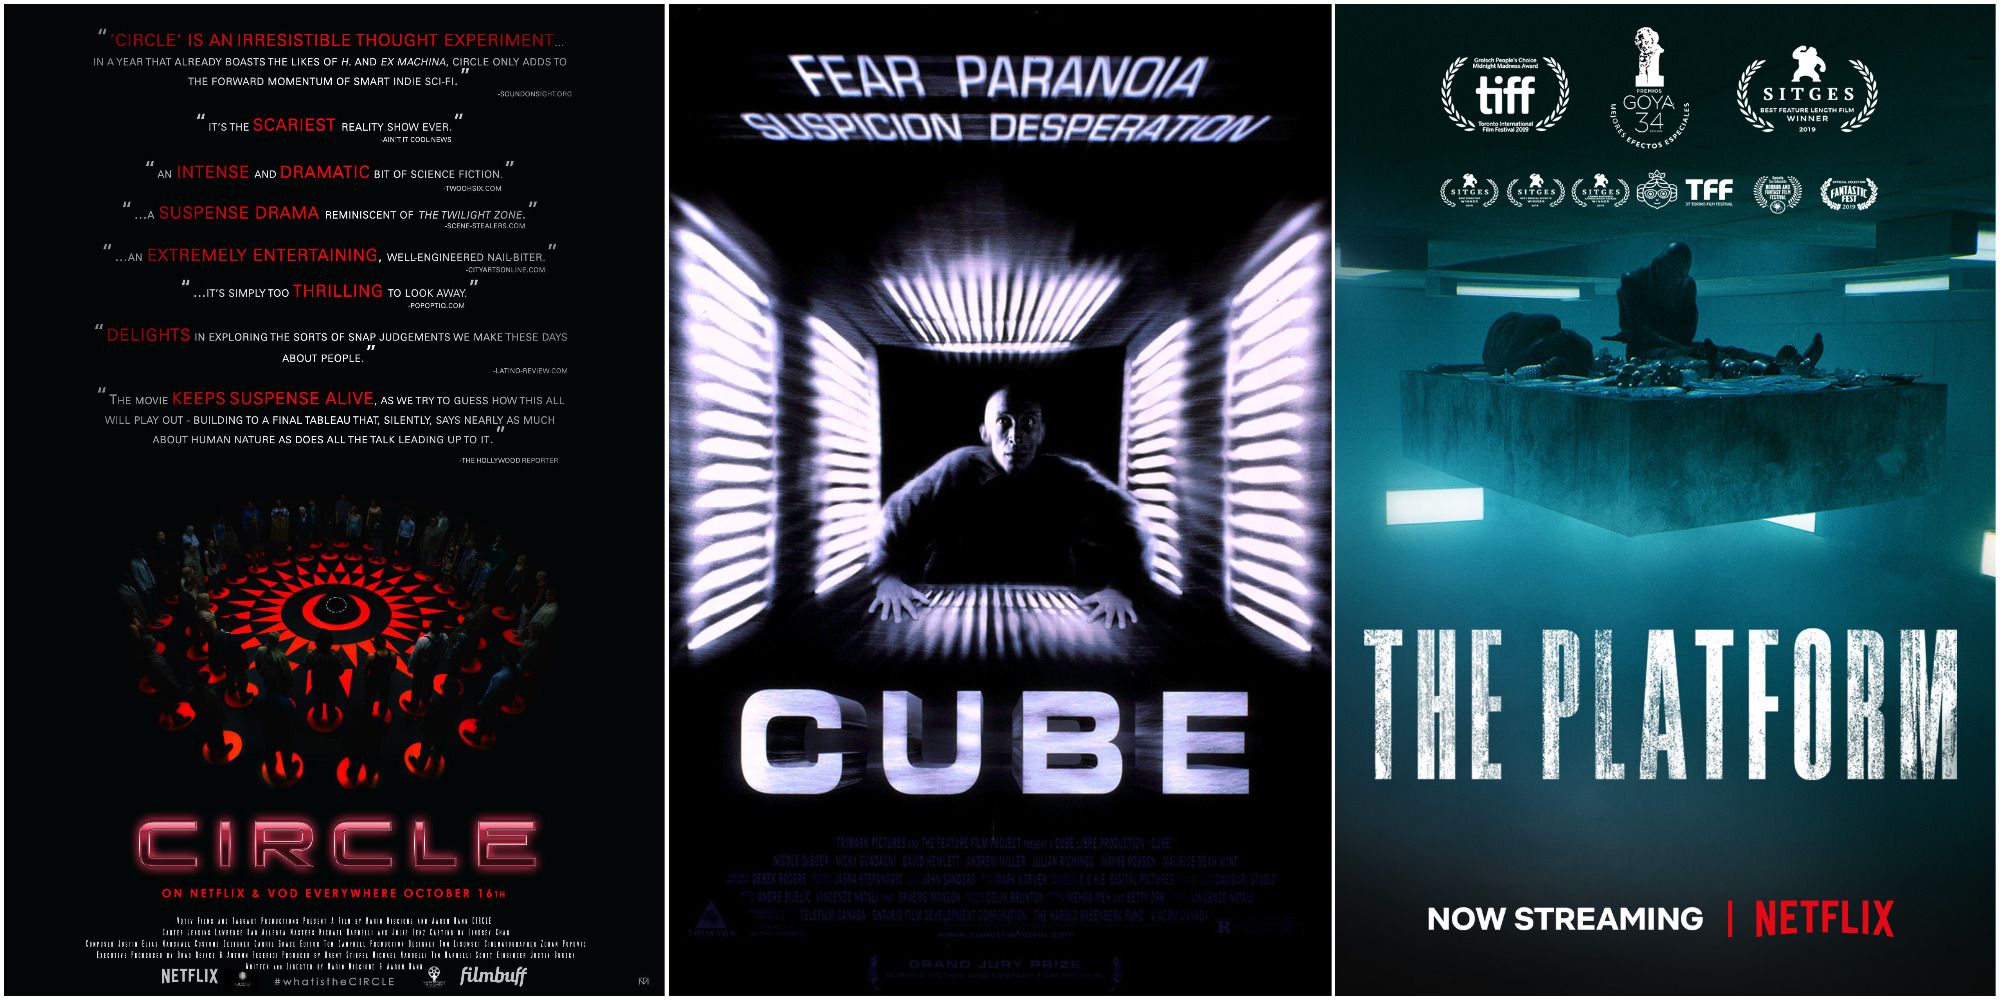 Best Horror Movies On Canadian Netflix 2020 : 15 Best Spanish Language Movies On Netflix 2021 Movies In Spanish To Watch : It's not the most wholesome movie, but it's definitely.